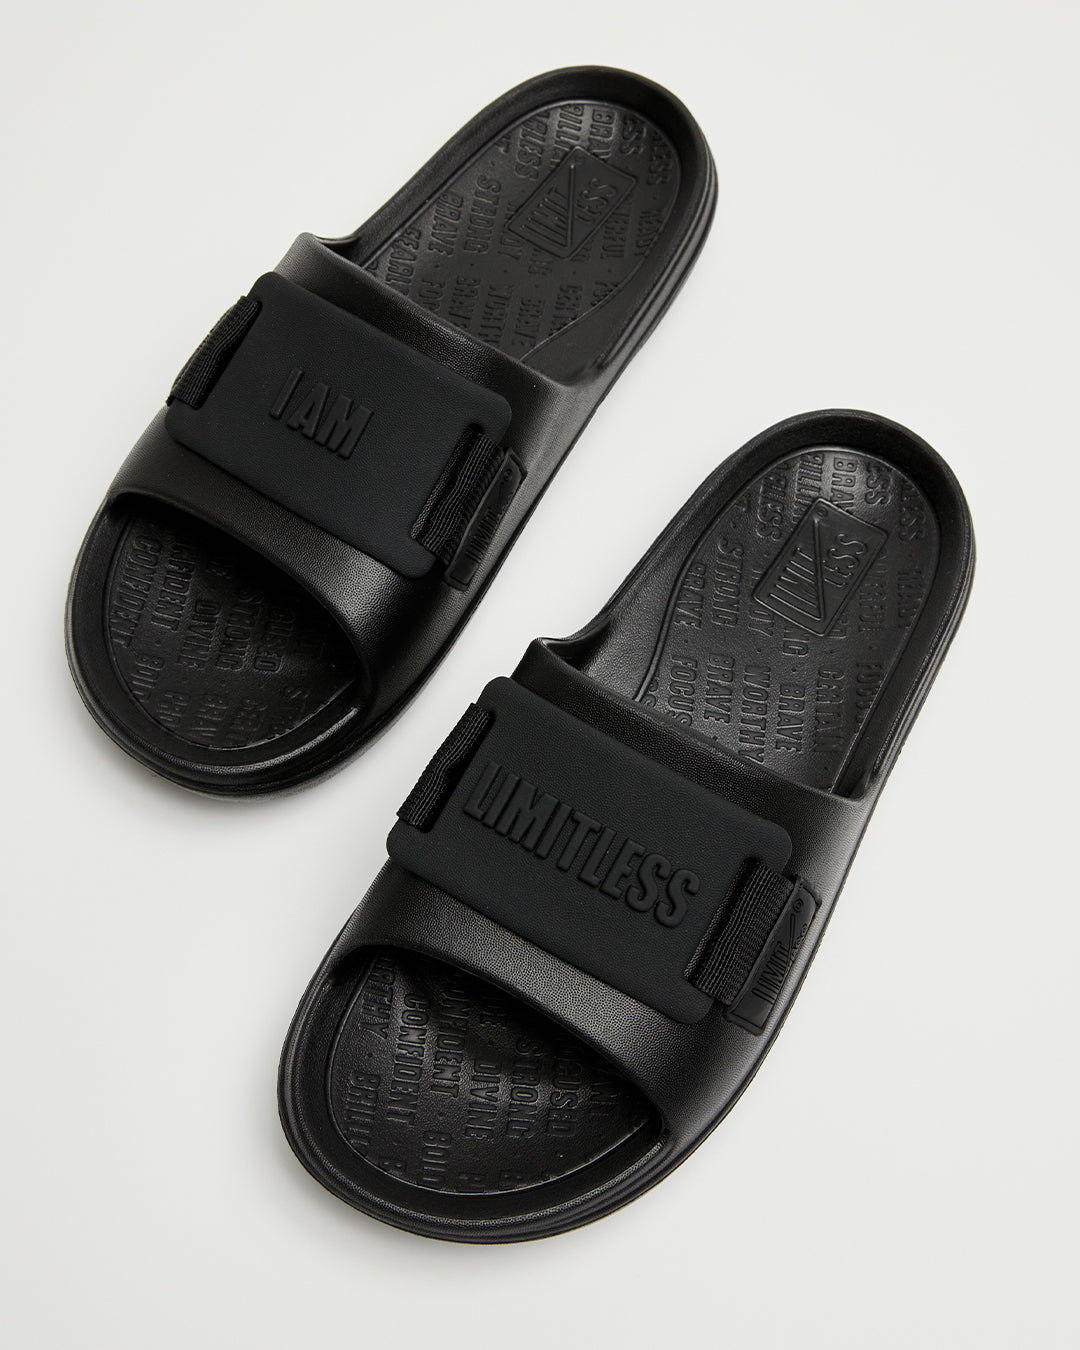 LIMITLESS SLIDES™ WITH ESSENTIAL TIBAH™ QUAD - CHESTERTON HIGH SCHOOL EDITION